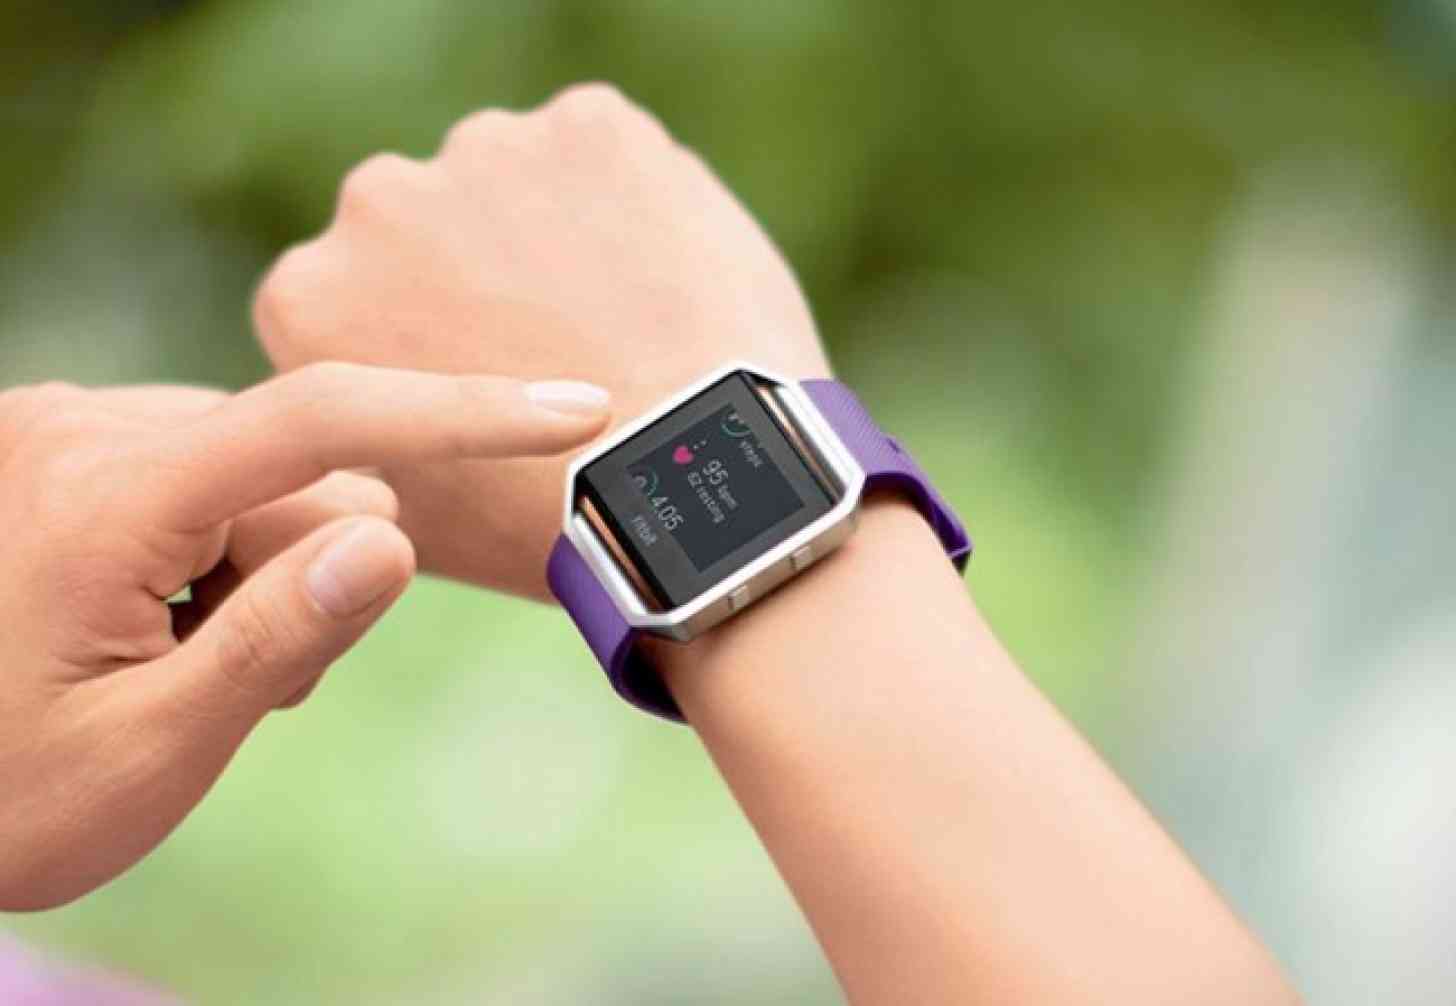 Fitbit has shipped over 1 million Blaze units, a million more Alta devices a month after launch